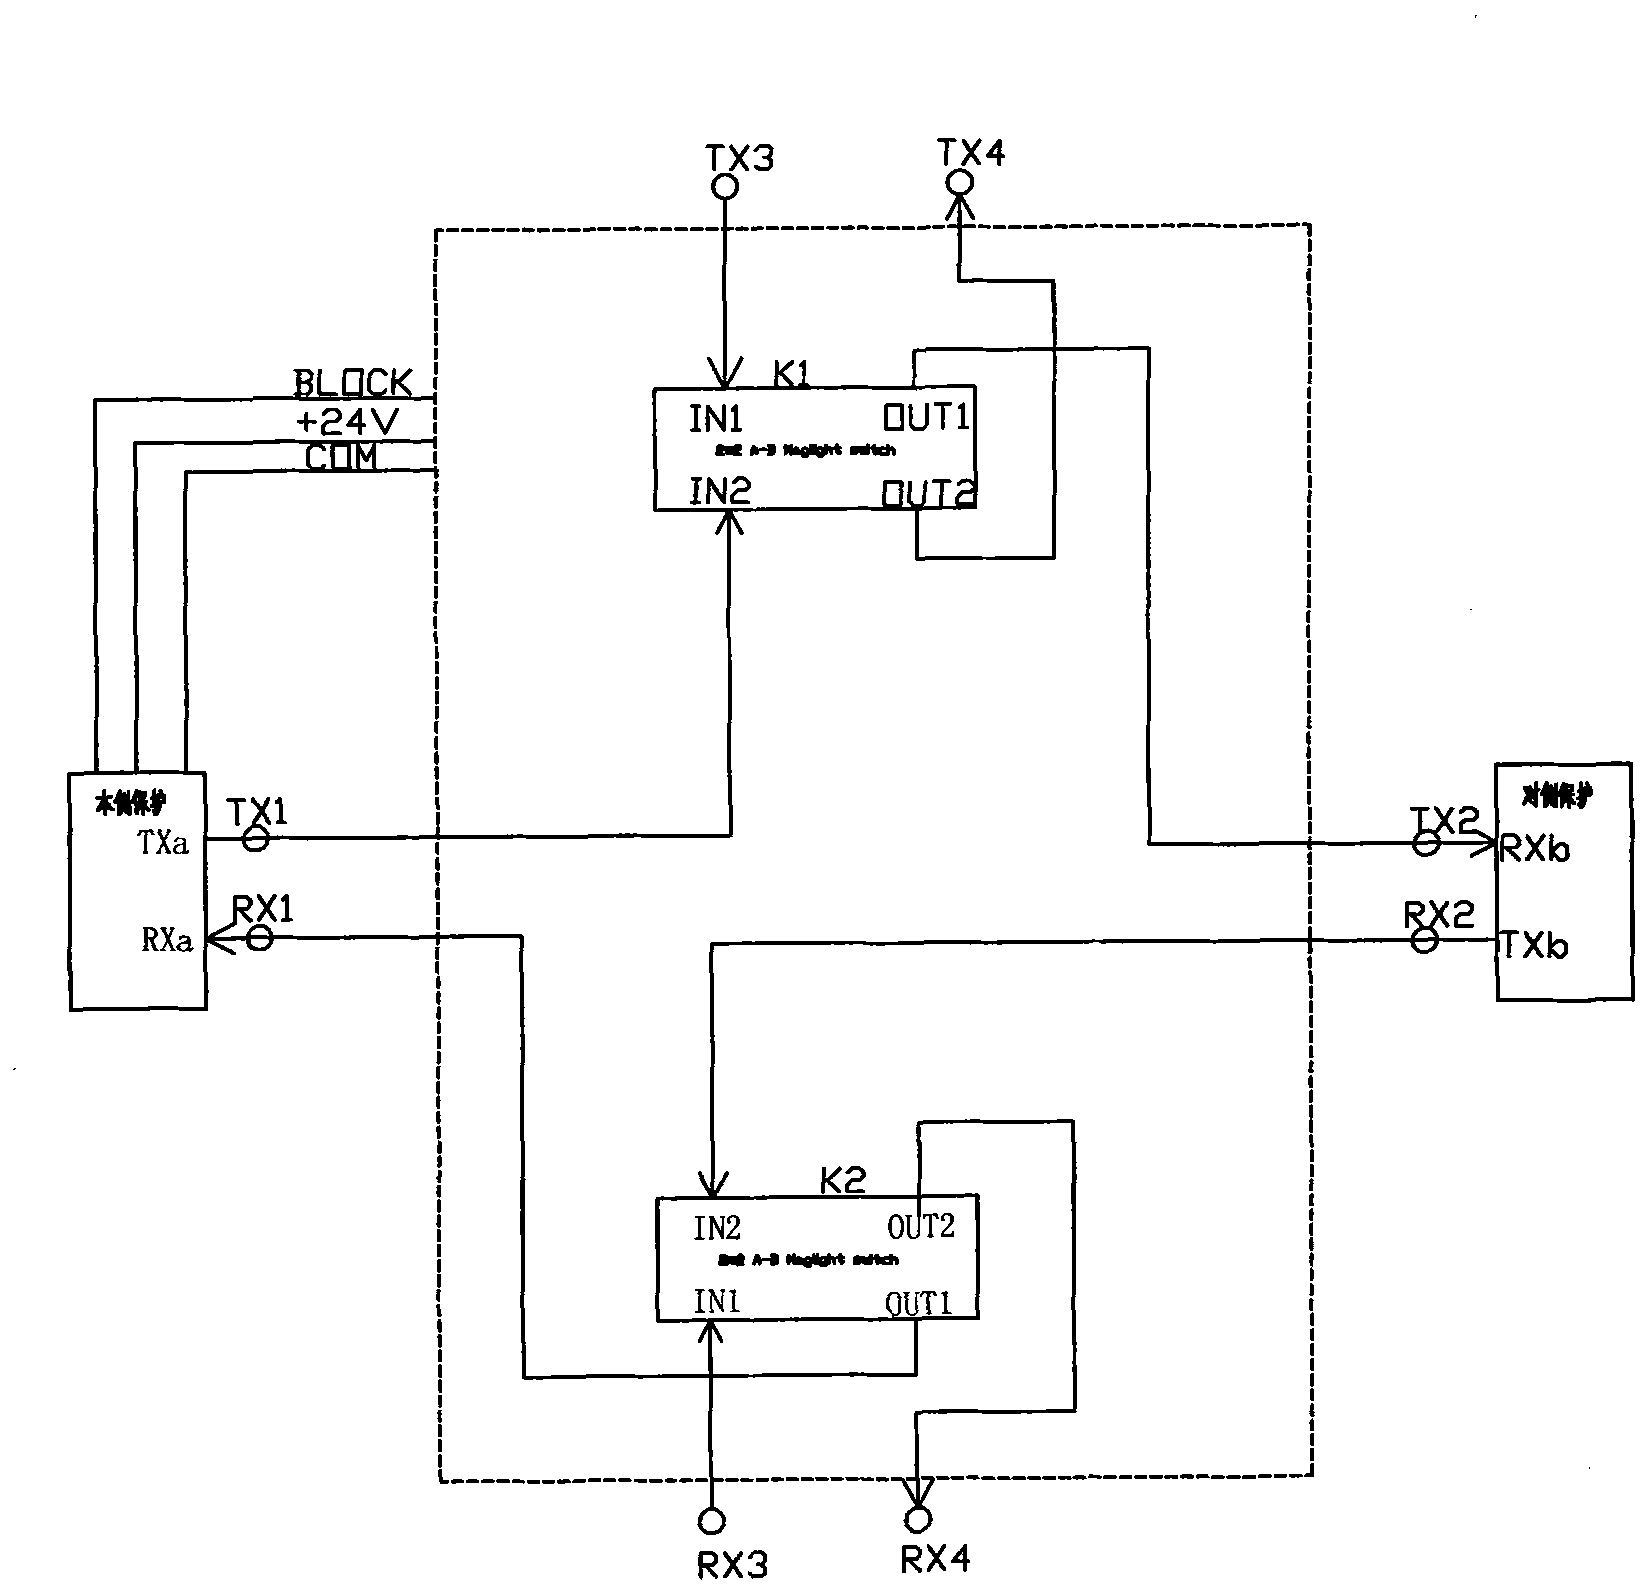 Optical path switching interface mechanism for fiber channel test of relay protection device